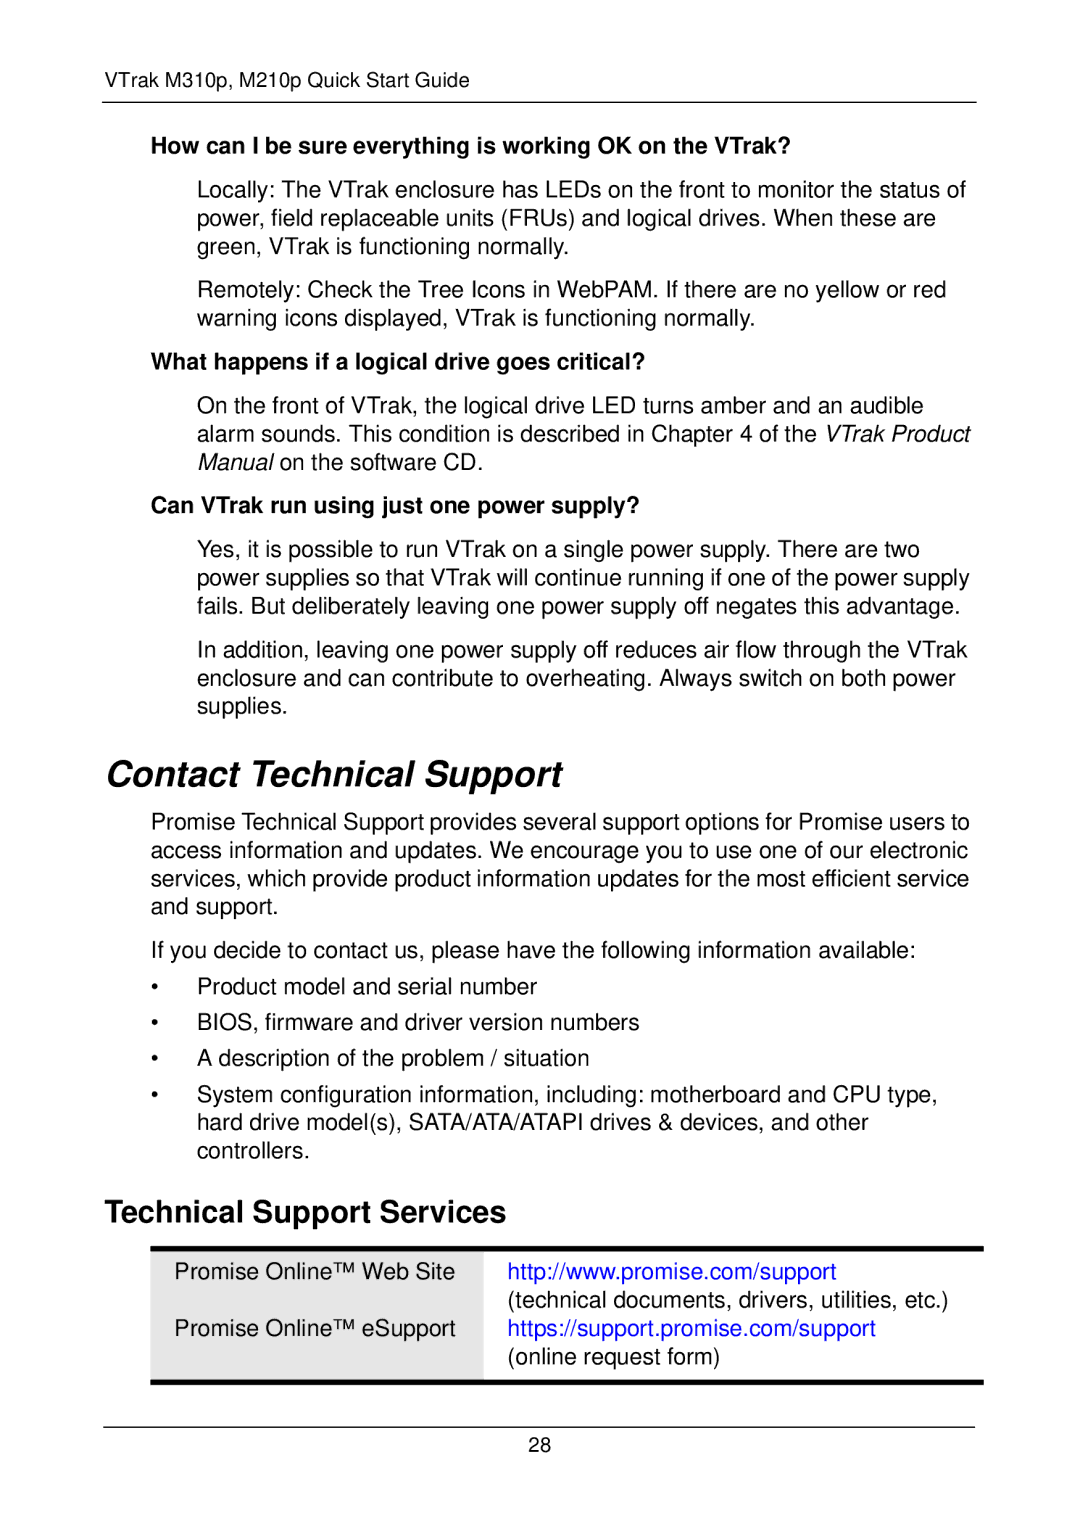 Promise Technology vtrak Contact Technical Support, Technical Support Services, Can VTrak run using just one power supply? 